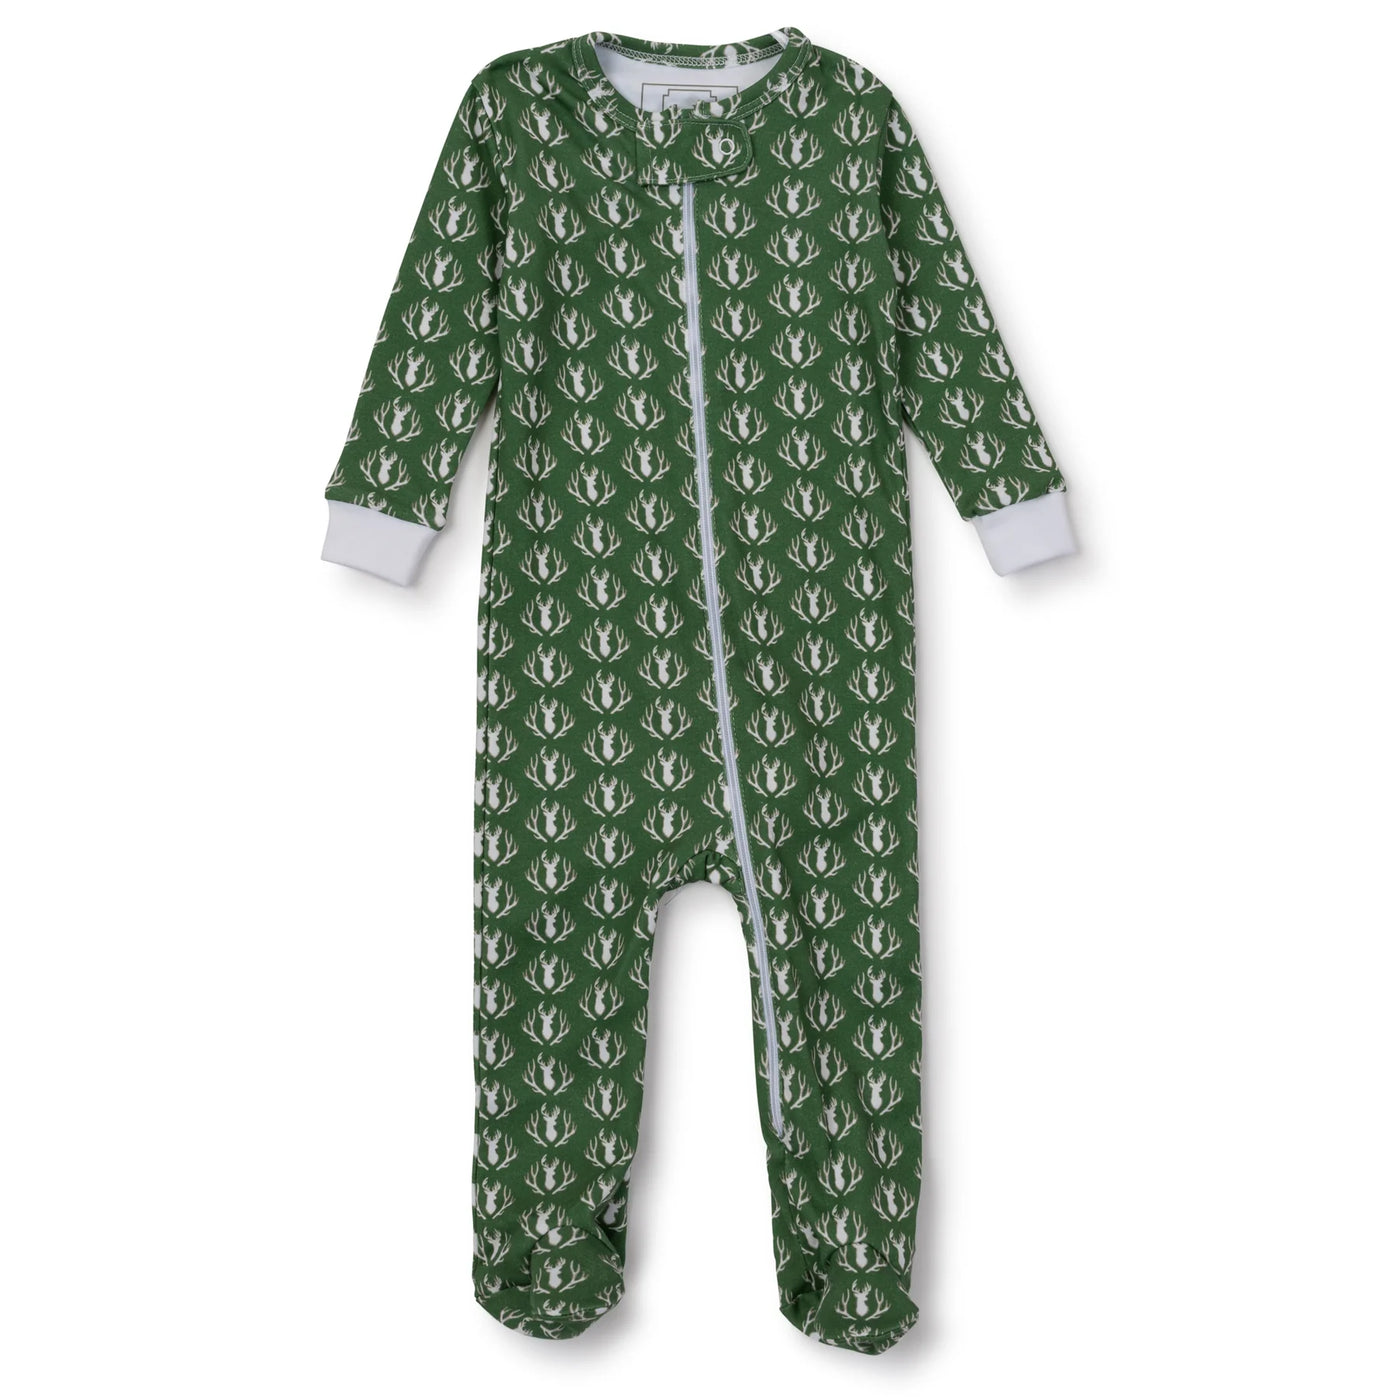 Deers and Antlers Parker Pima Cotton Zipper Pajama